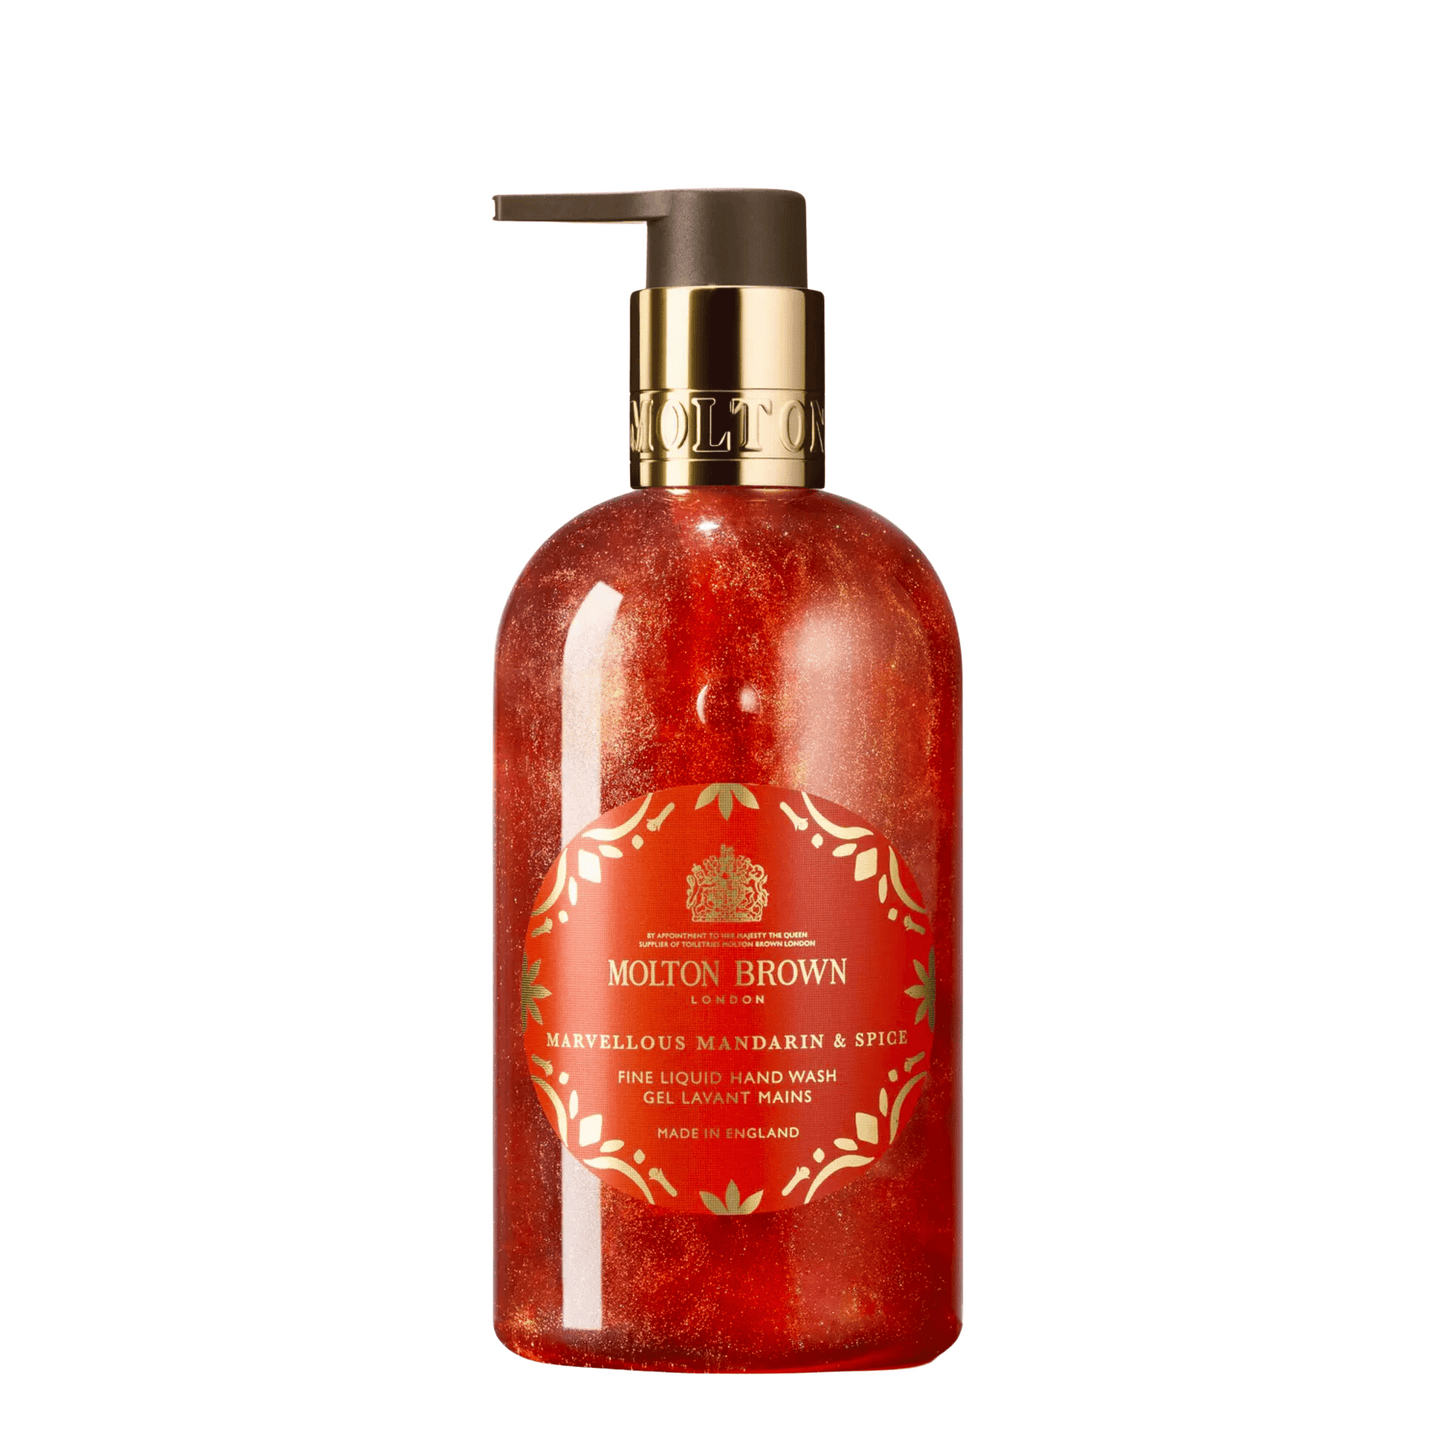 Primary Image of Hand Wash - Marvellous Mandarin and Spice